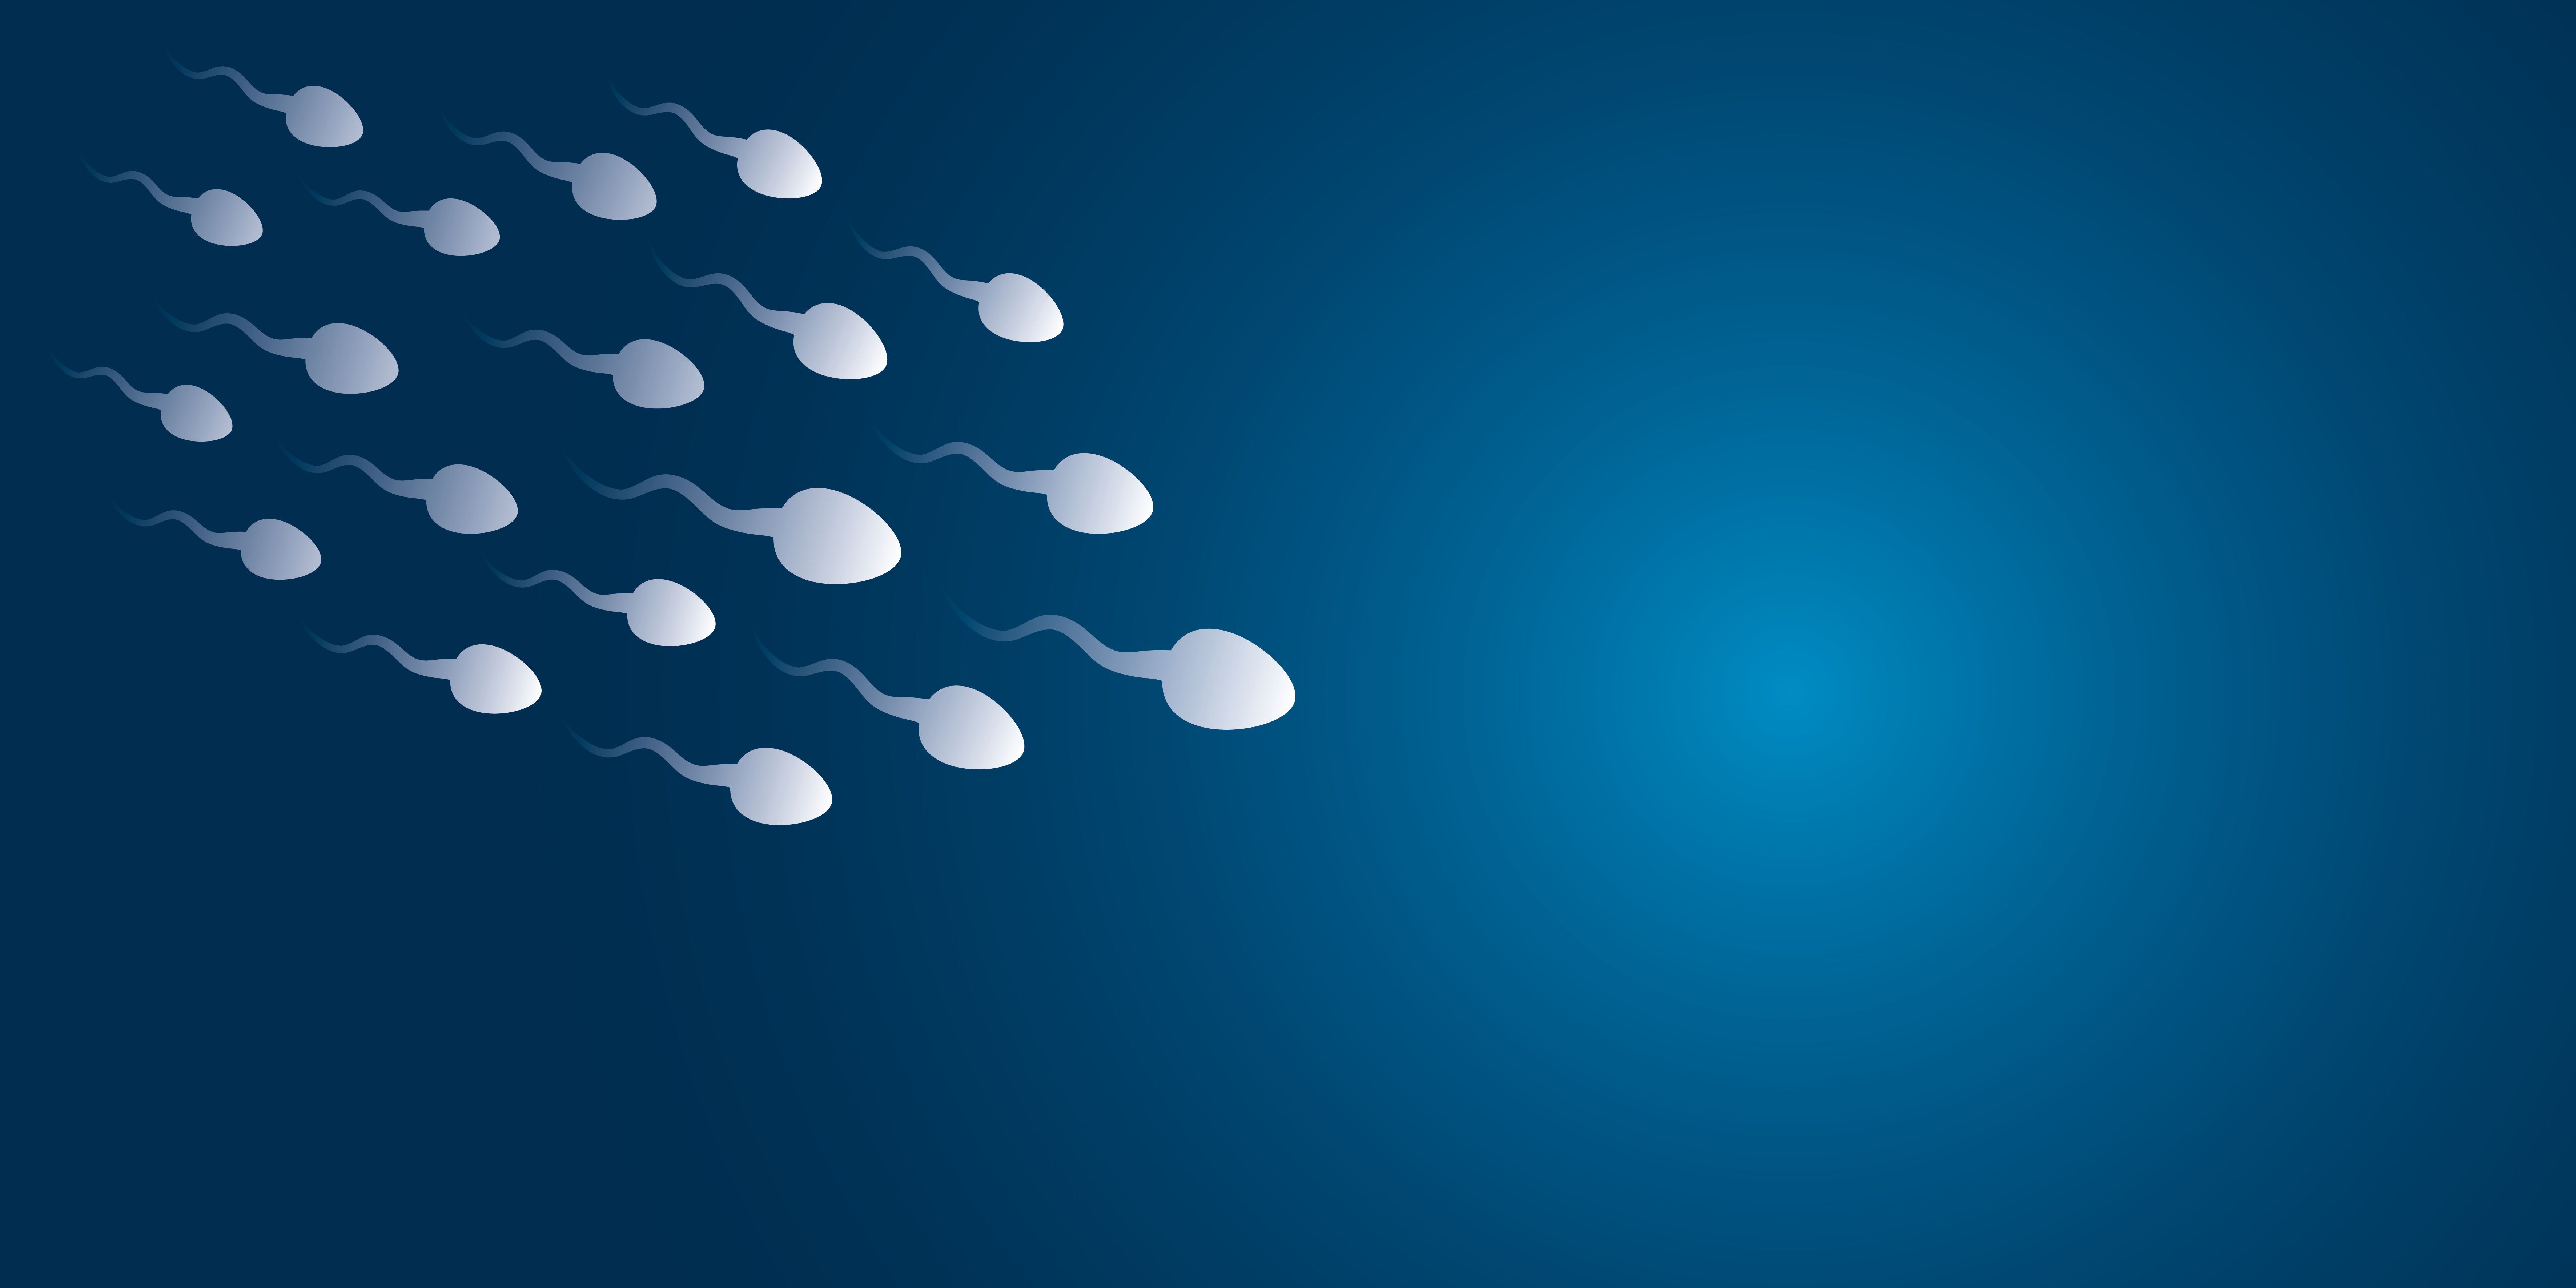 Men Say They're Not Willing To Put Up With Birth Control Side